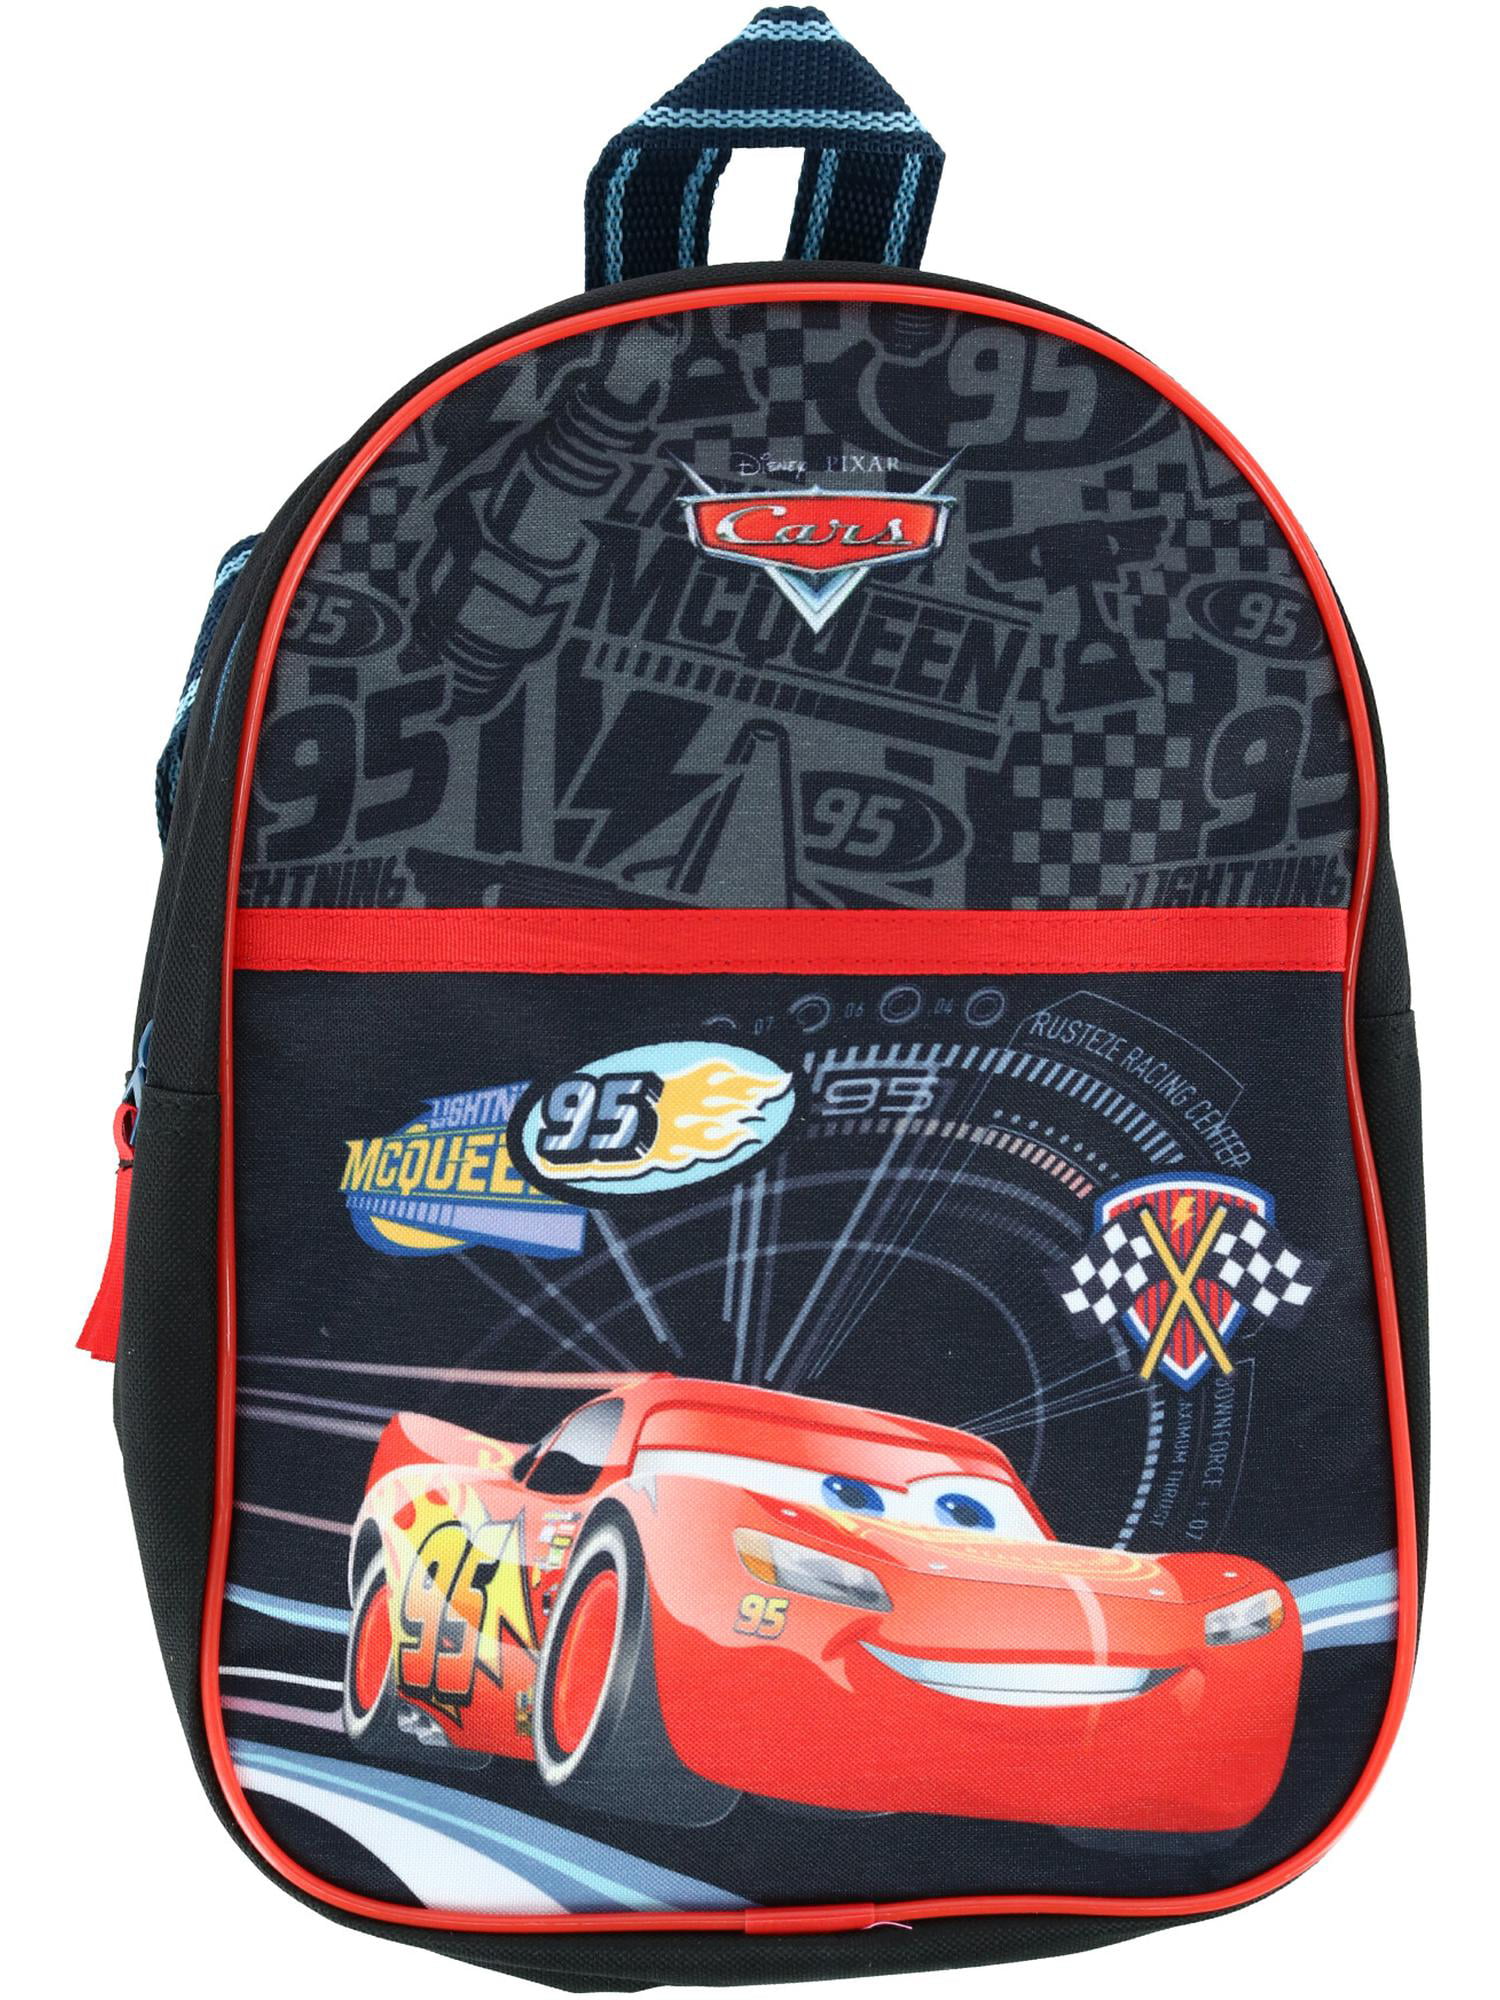 Black with Cars Fabric in Mickey Mouse Head and Personalization Disney Cars Lightning McQueen Draw String Backpack for Adults /& Kids